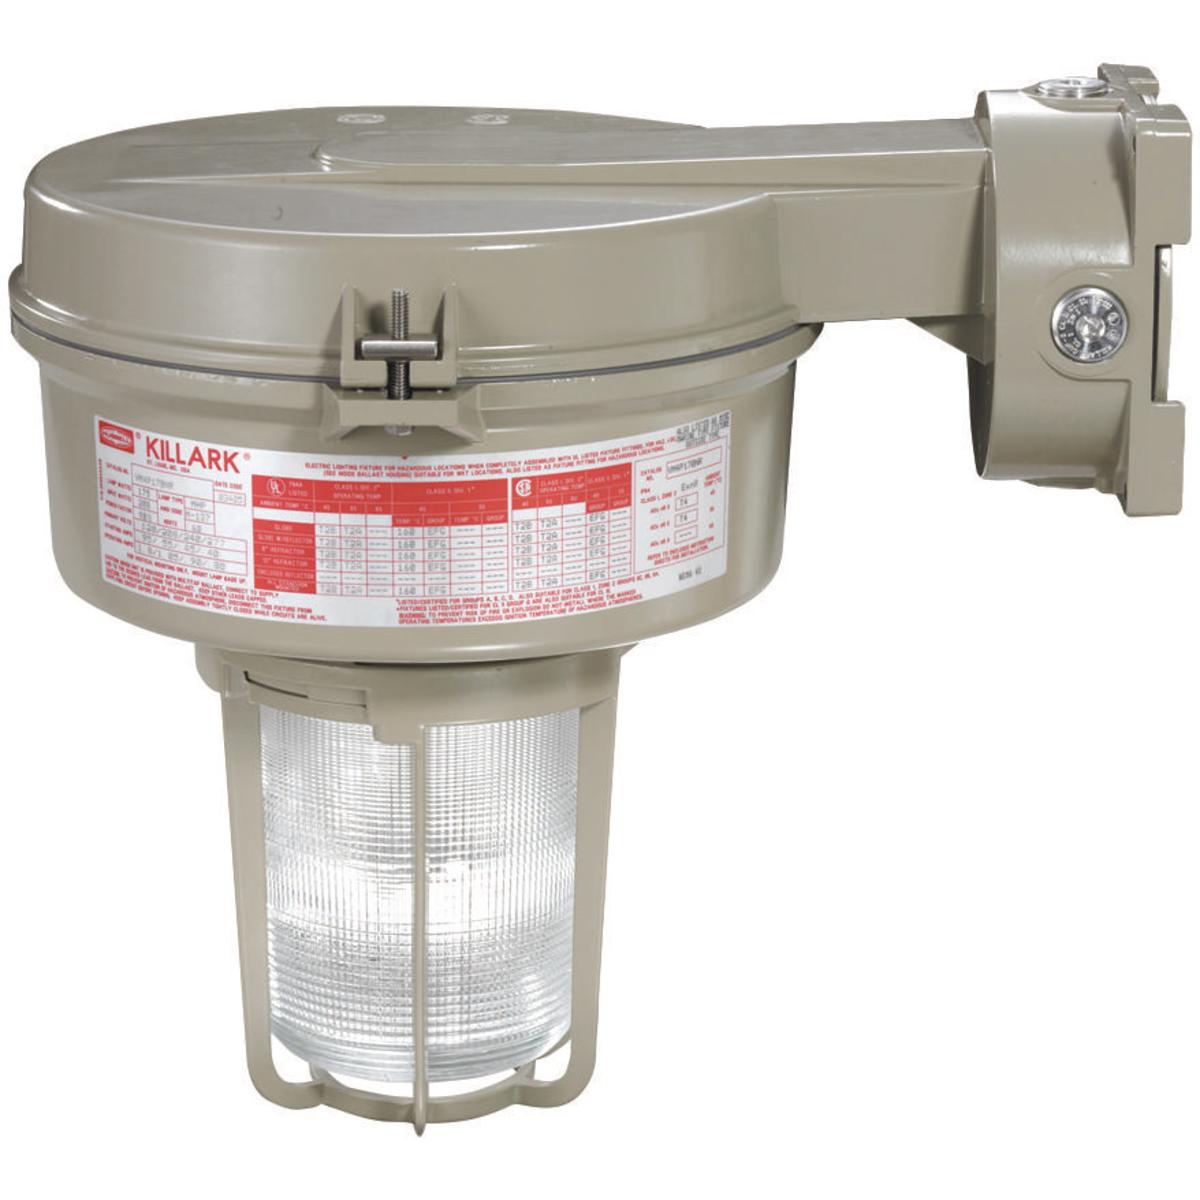 Hubbell VM3S150B2R1G VM3 Series - 150W High Pressure Sodium Quadri-Volt - 3/4" Wall Mount - Type I Glass Refractor and Guard  ; Ballast tank and splice box – corrosion resistant copper-free aluminum alloy with baked powder epoxy/polyester finish, electrostatically applied for